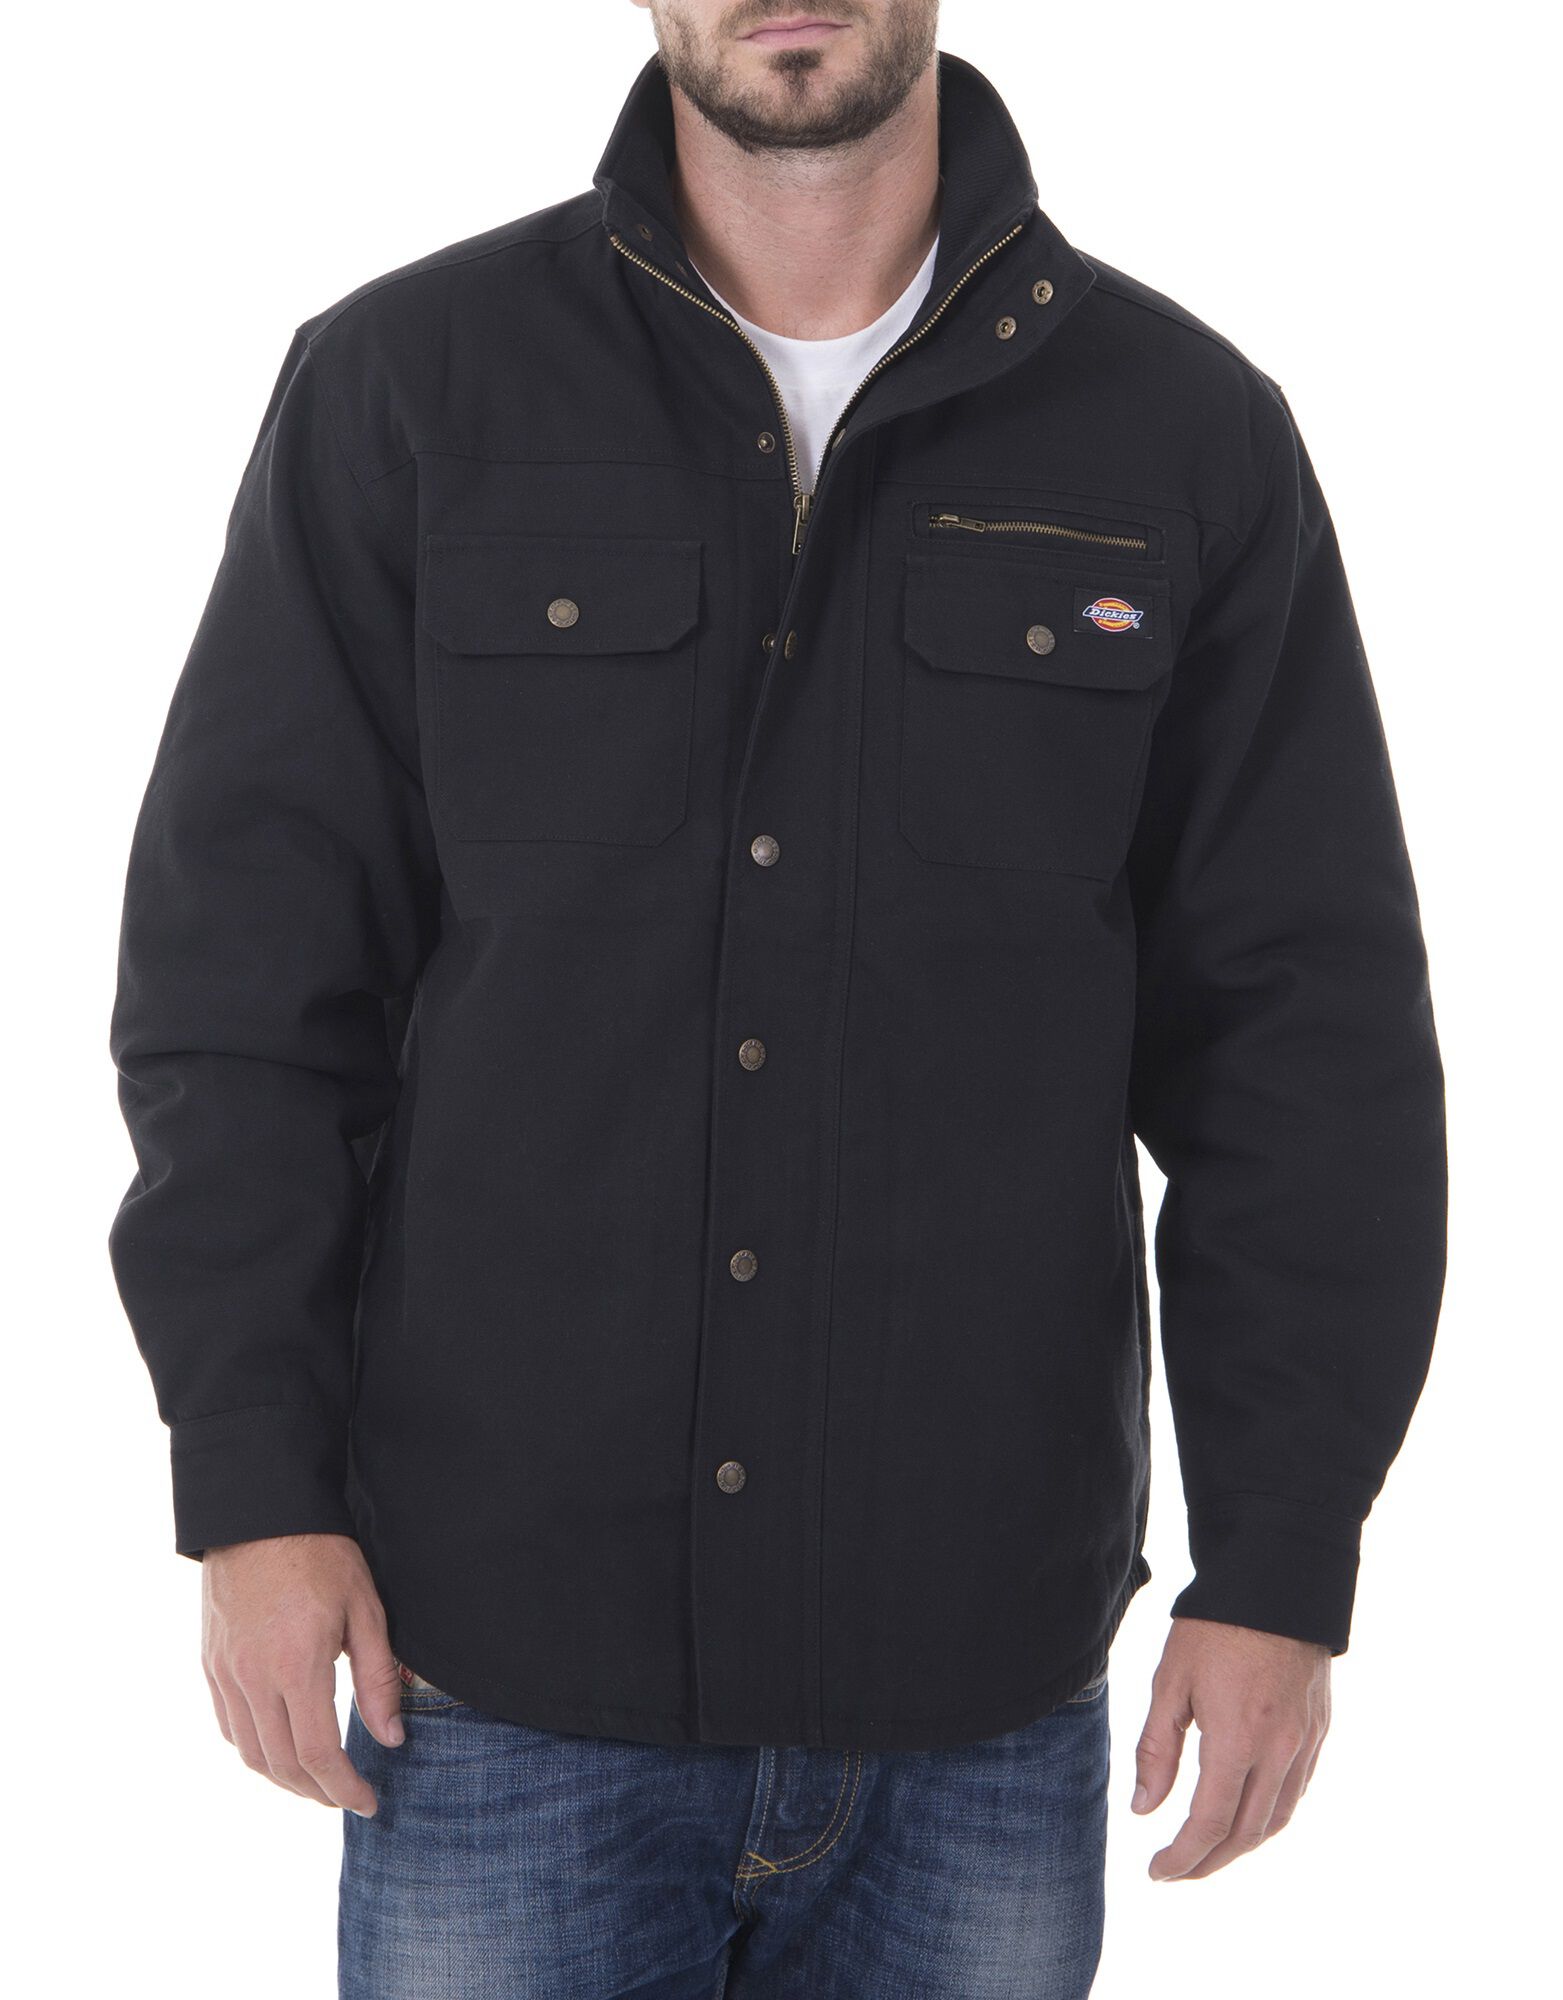 Men's Long Sleeve Quilted Shirt Jacket - Dickies US